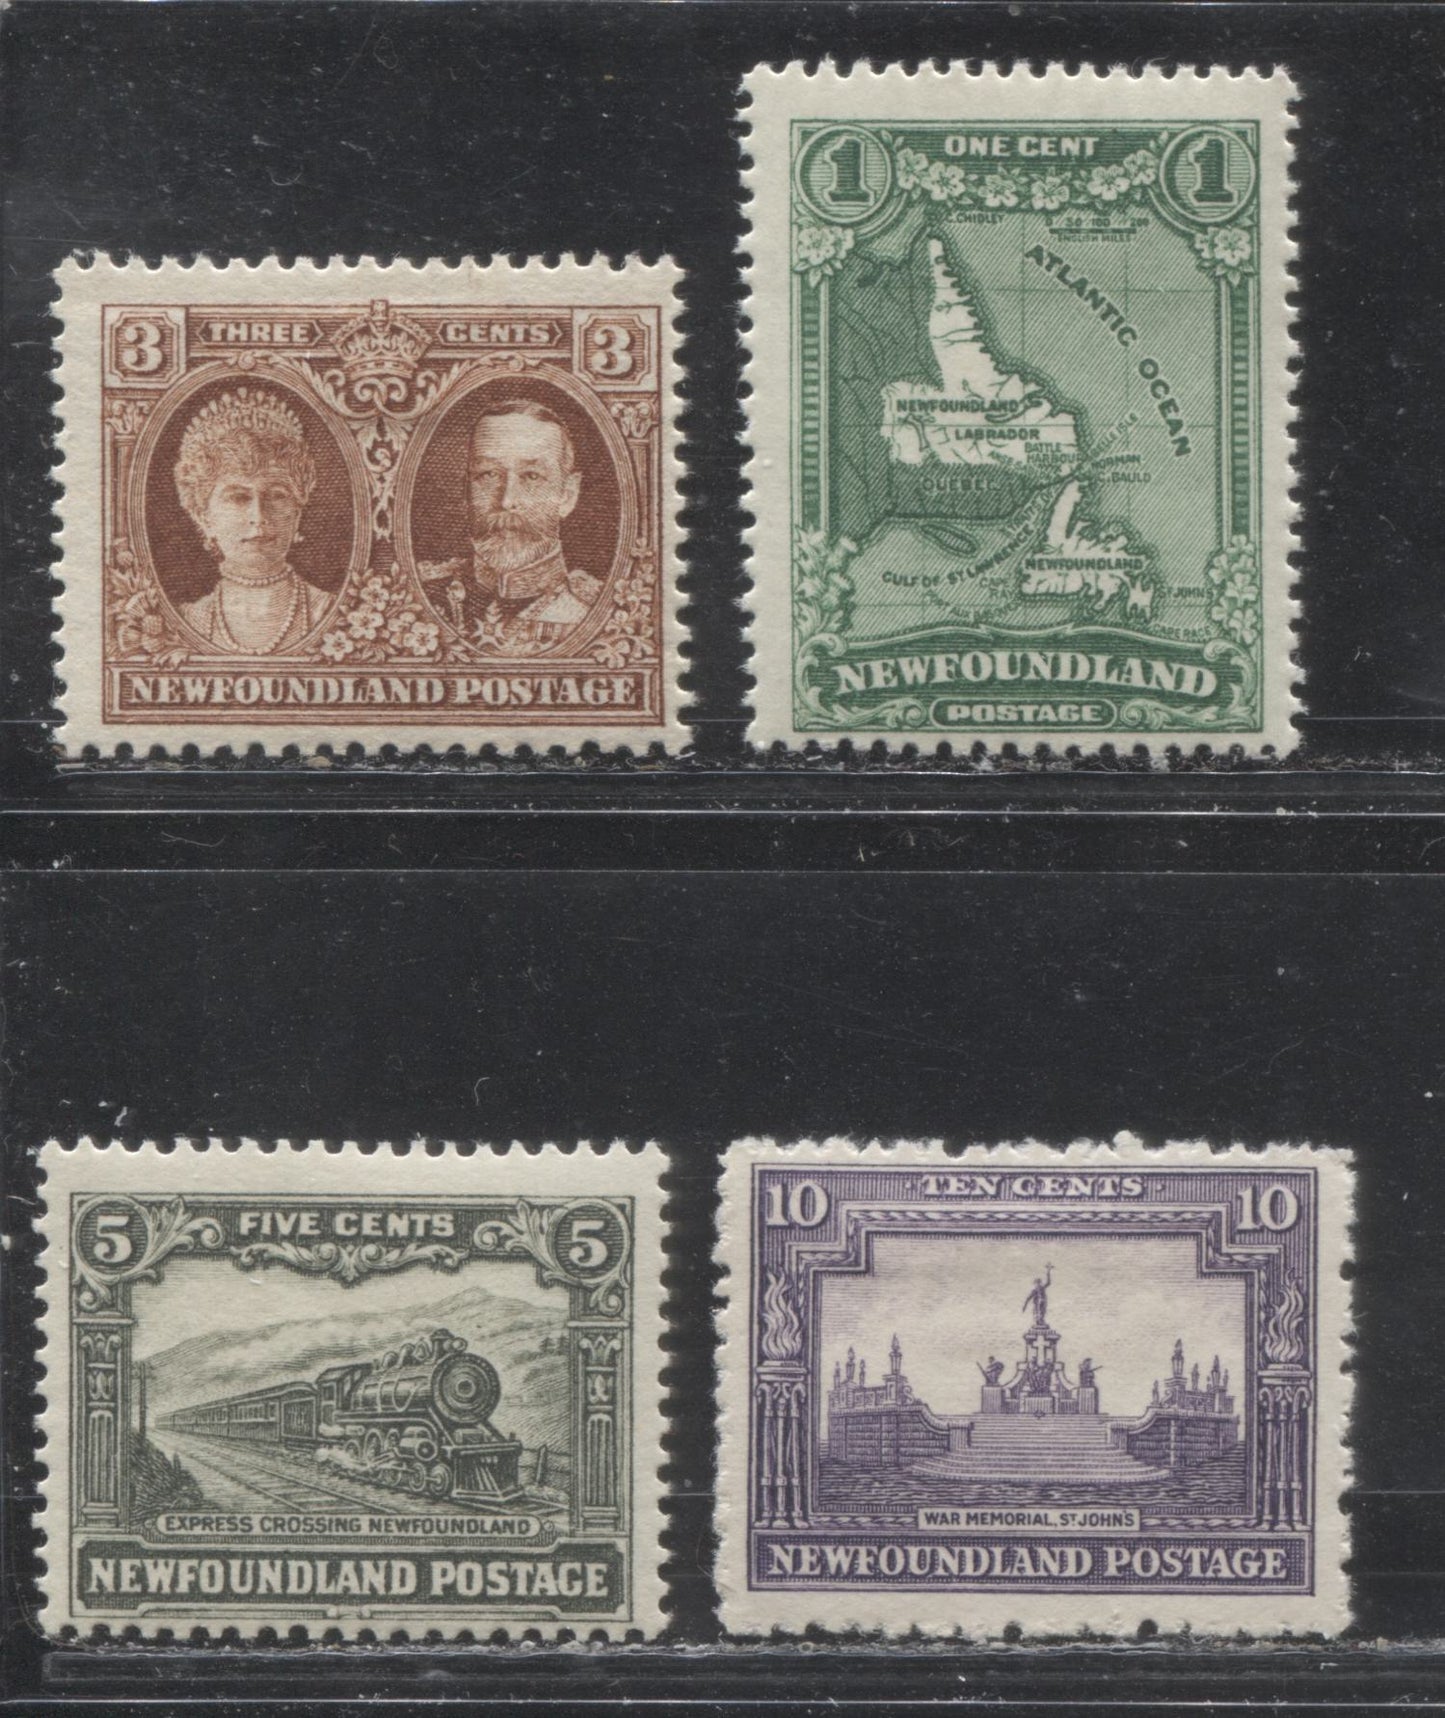 Lot 82 Newfoundland # 163/169 1c - 10c Green - Violet Map of Newfoundland - War Memorial, 1929-1931 Re-Engraved Publicity Issue, Four Fine OG Examples, Various Line and Comb Perfs